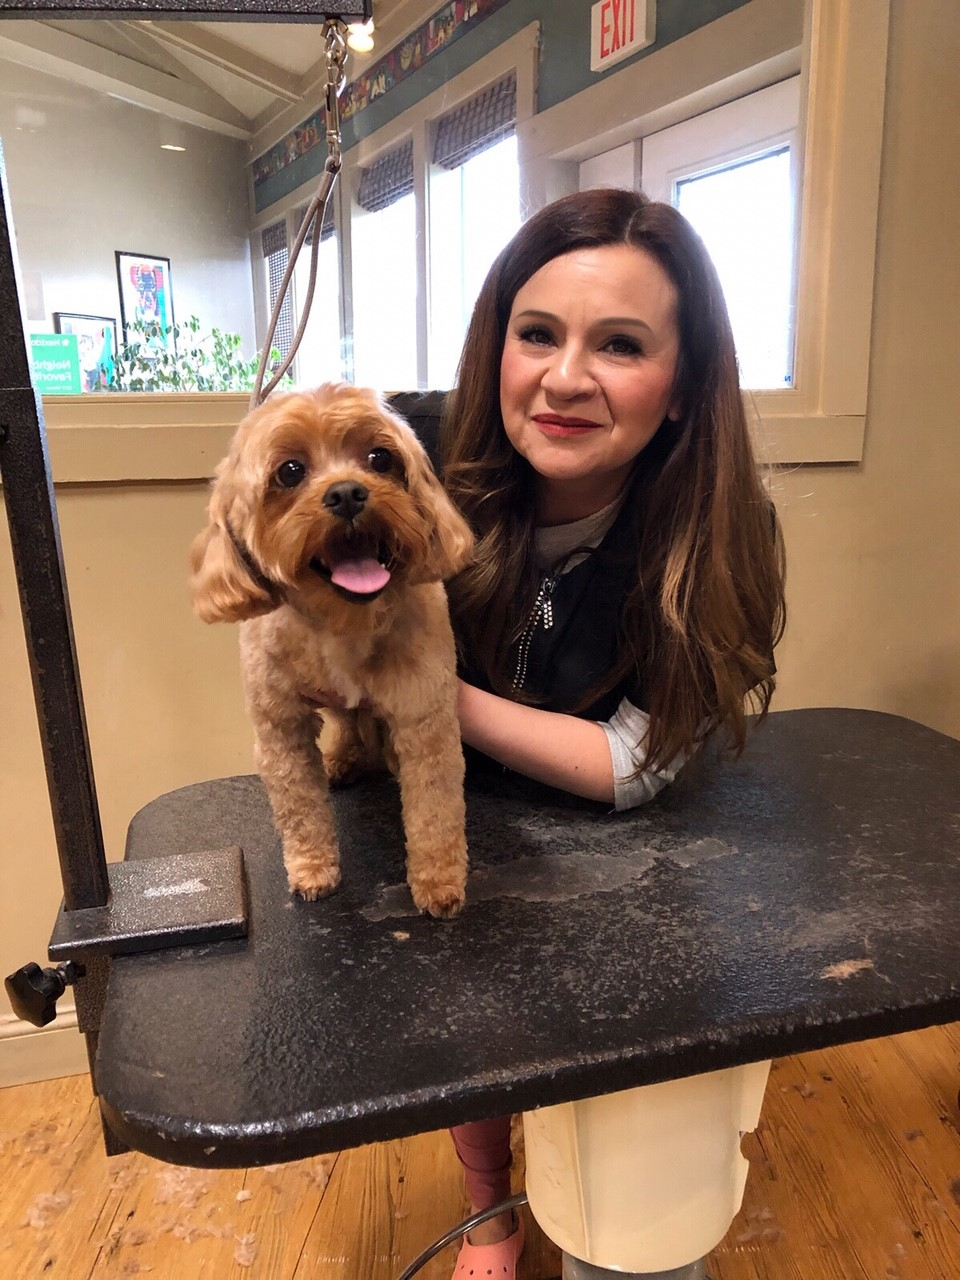 A woman holding a dog on a pet grooming table